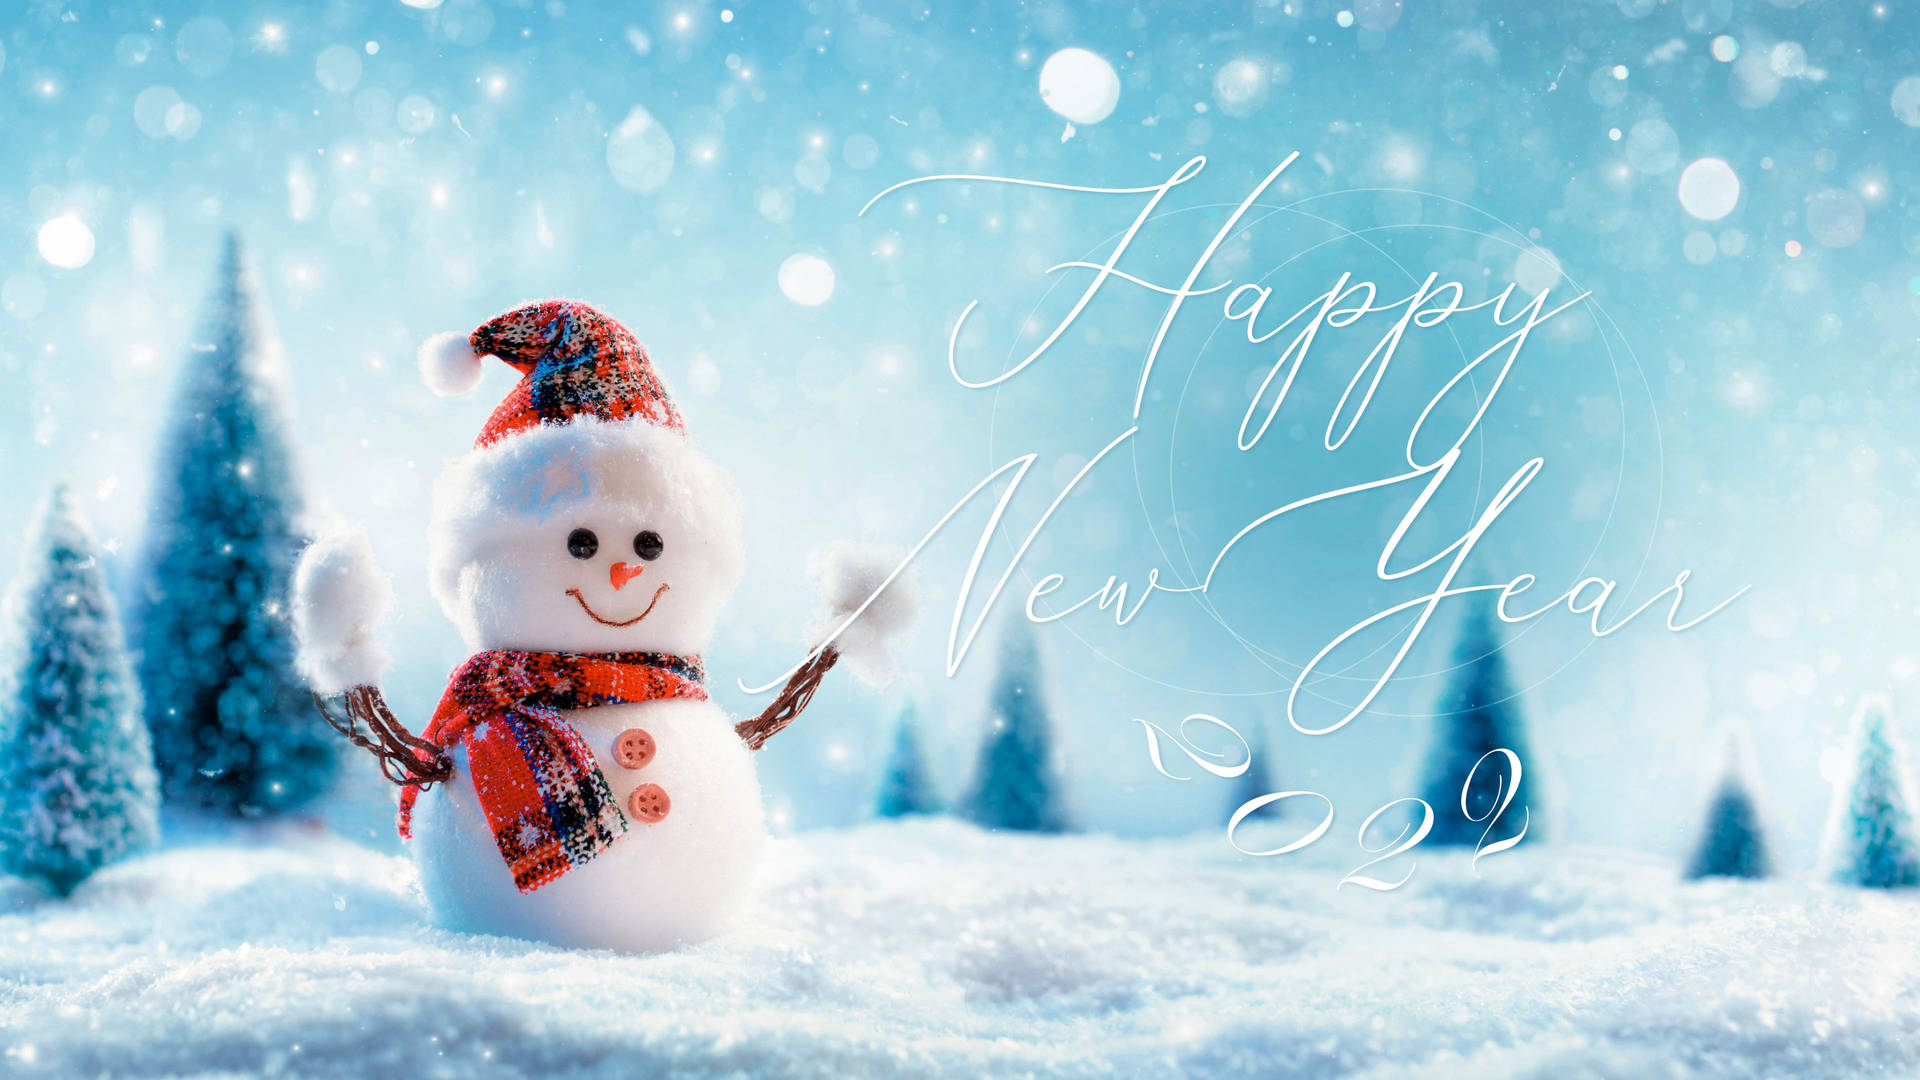 Welcome 2022! Celebrate The Year With Joy And Cheer | Happy New Year 2022 Celebration Image